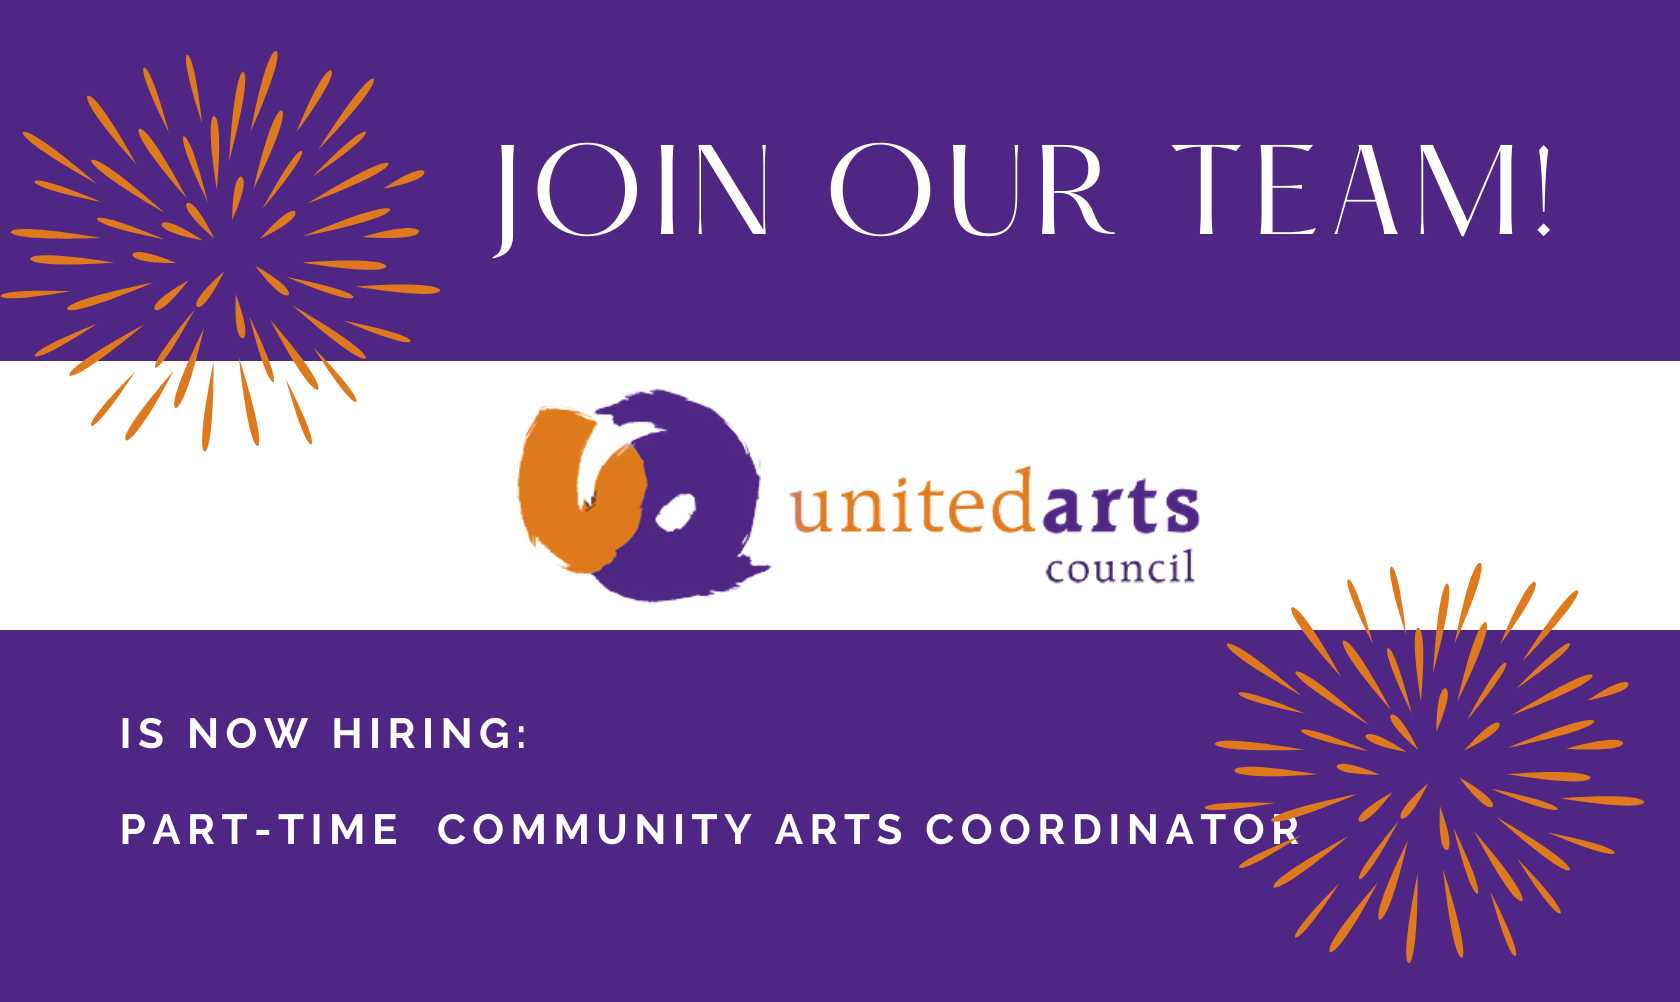 Join our Team United Arts is Hiring a part-time Community Arts Coordinator